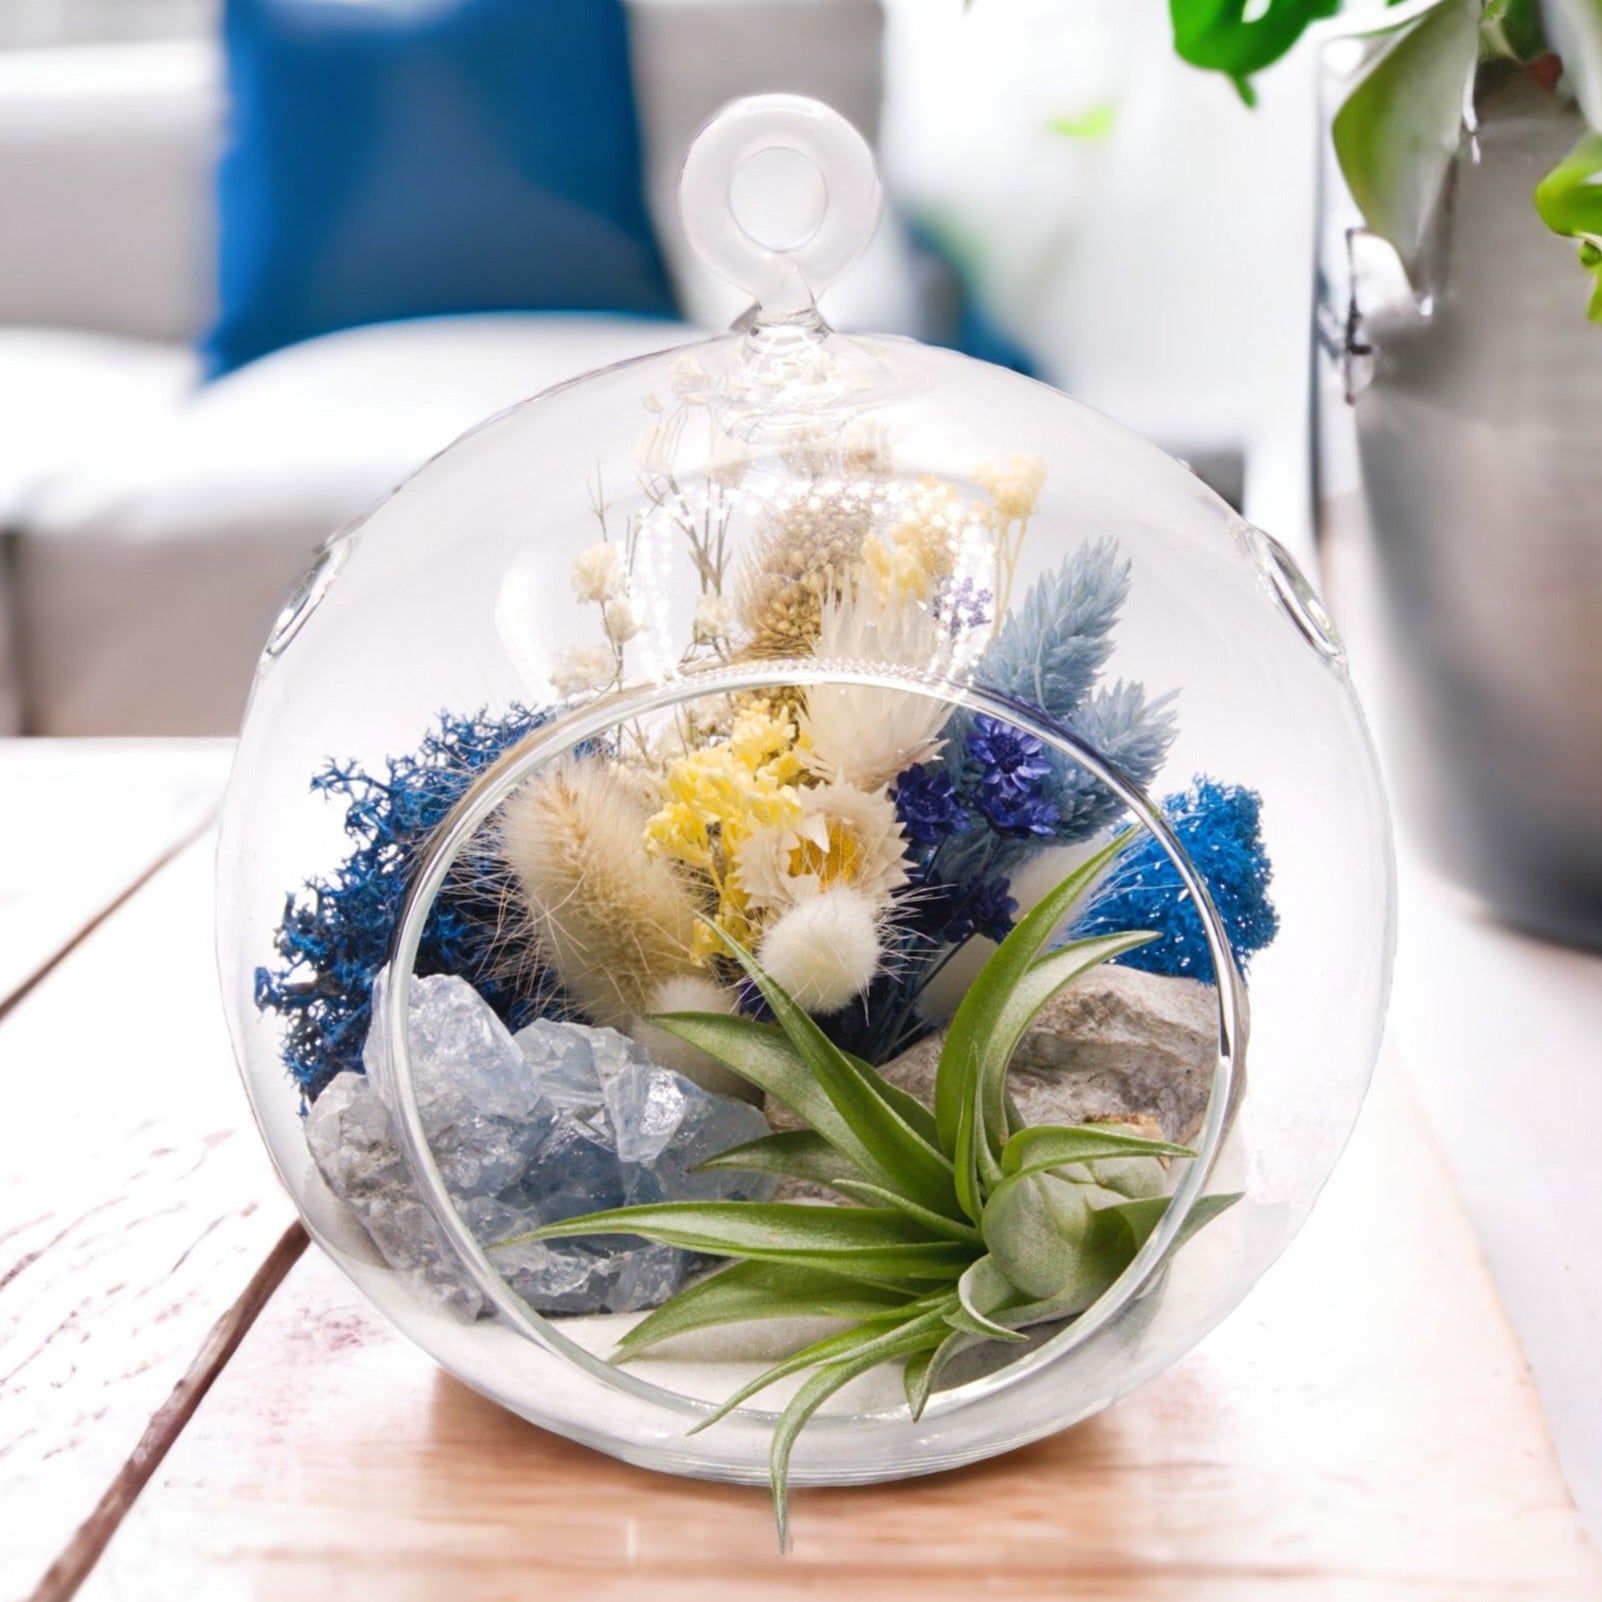 Glass bubble airplant terrarium with dried flowers and a celestite crystal